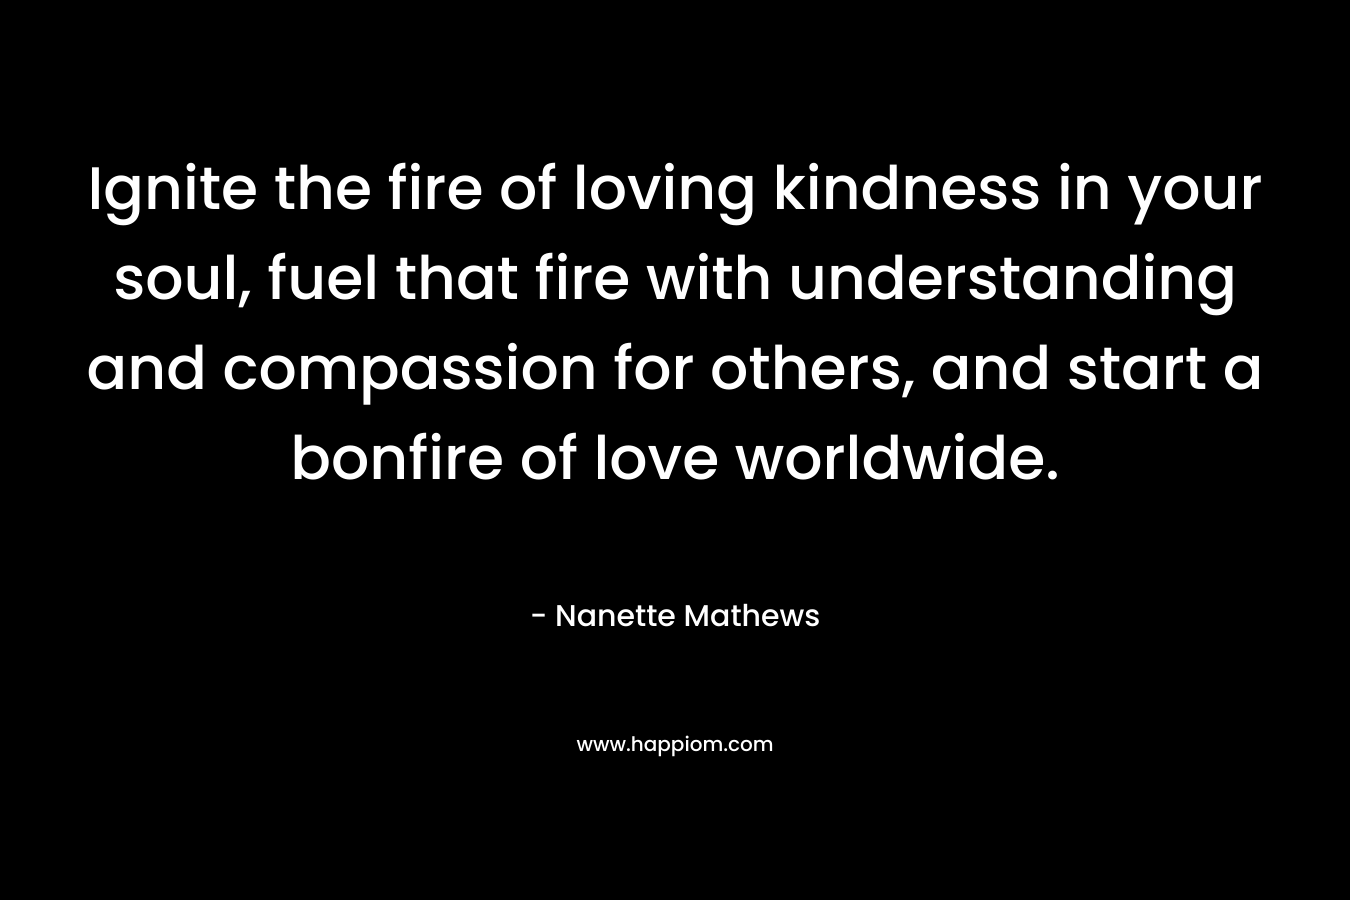 Ignite the fire of loving kindness in your soul, fuel that fire with understanding and compassion for others, and start a bonfire of love worldwide.